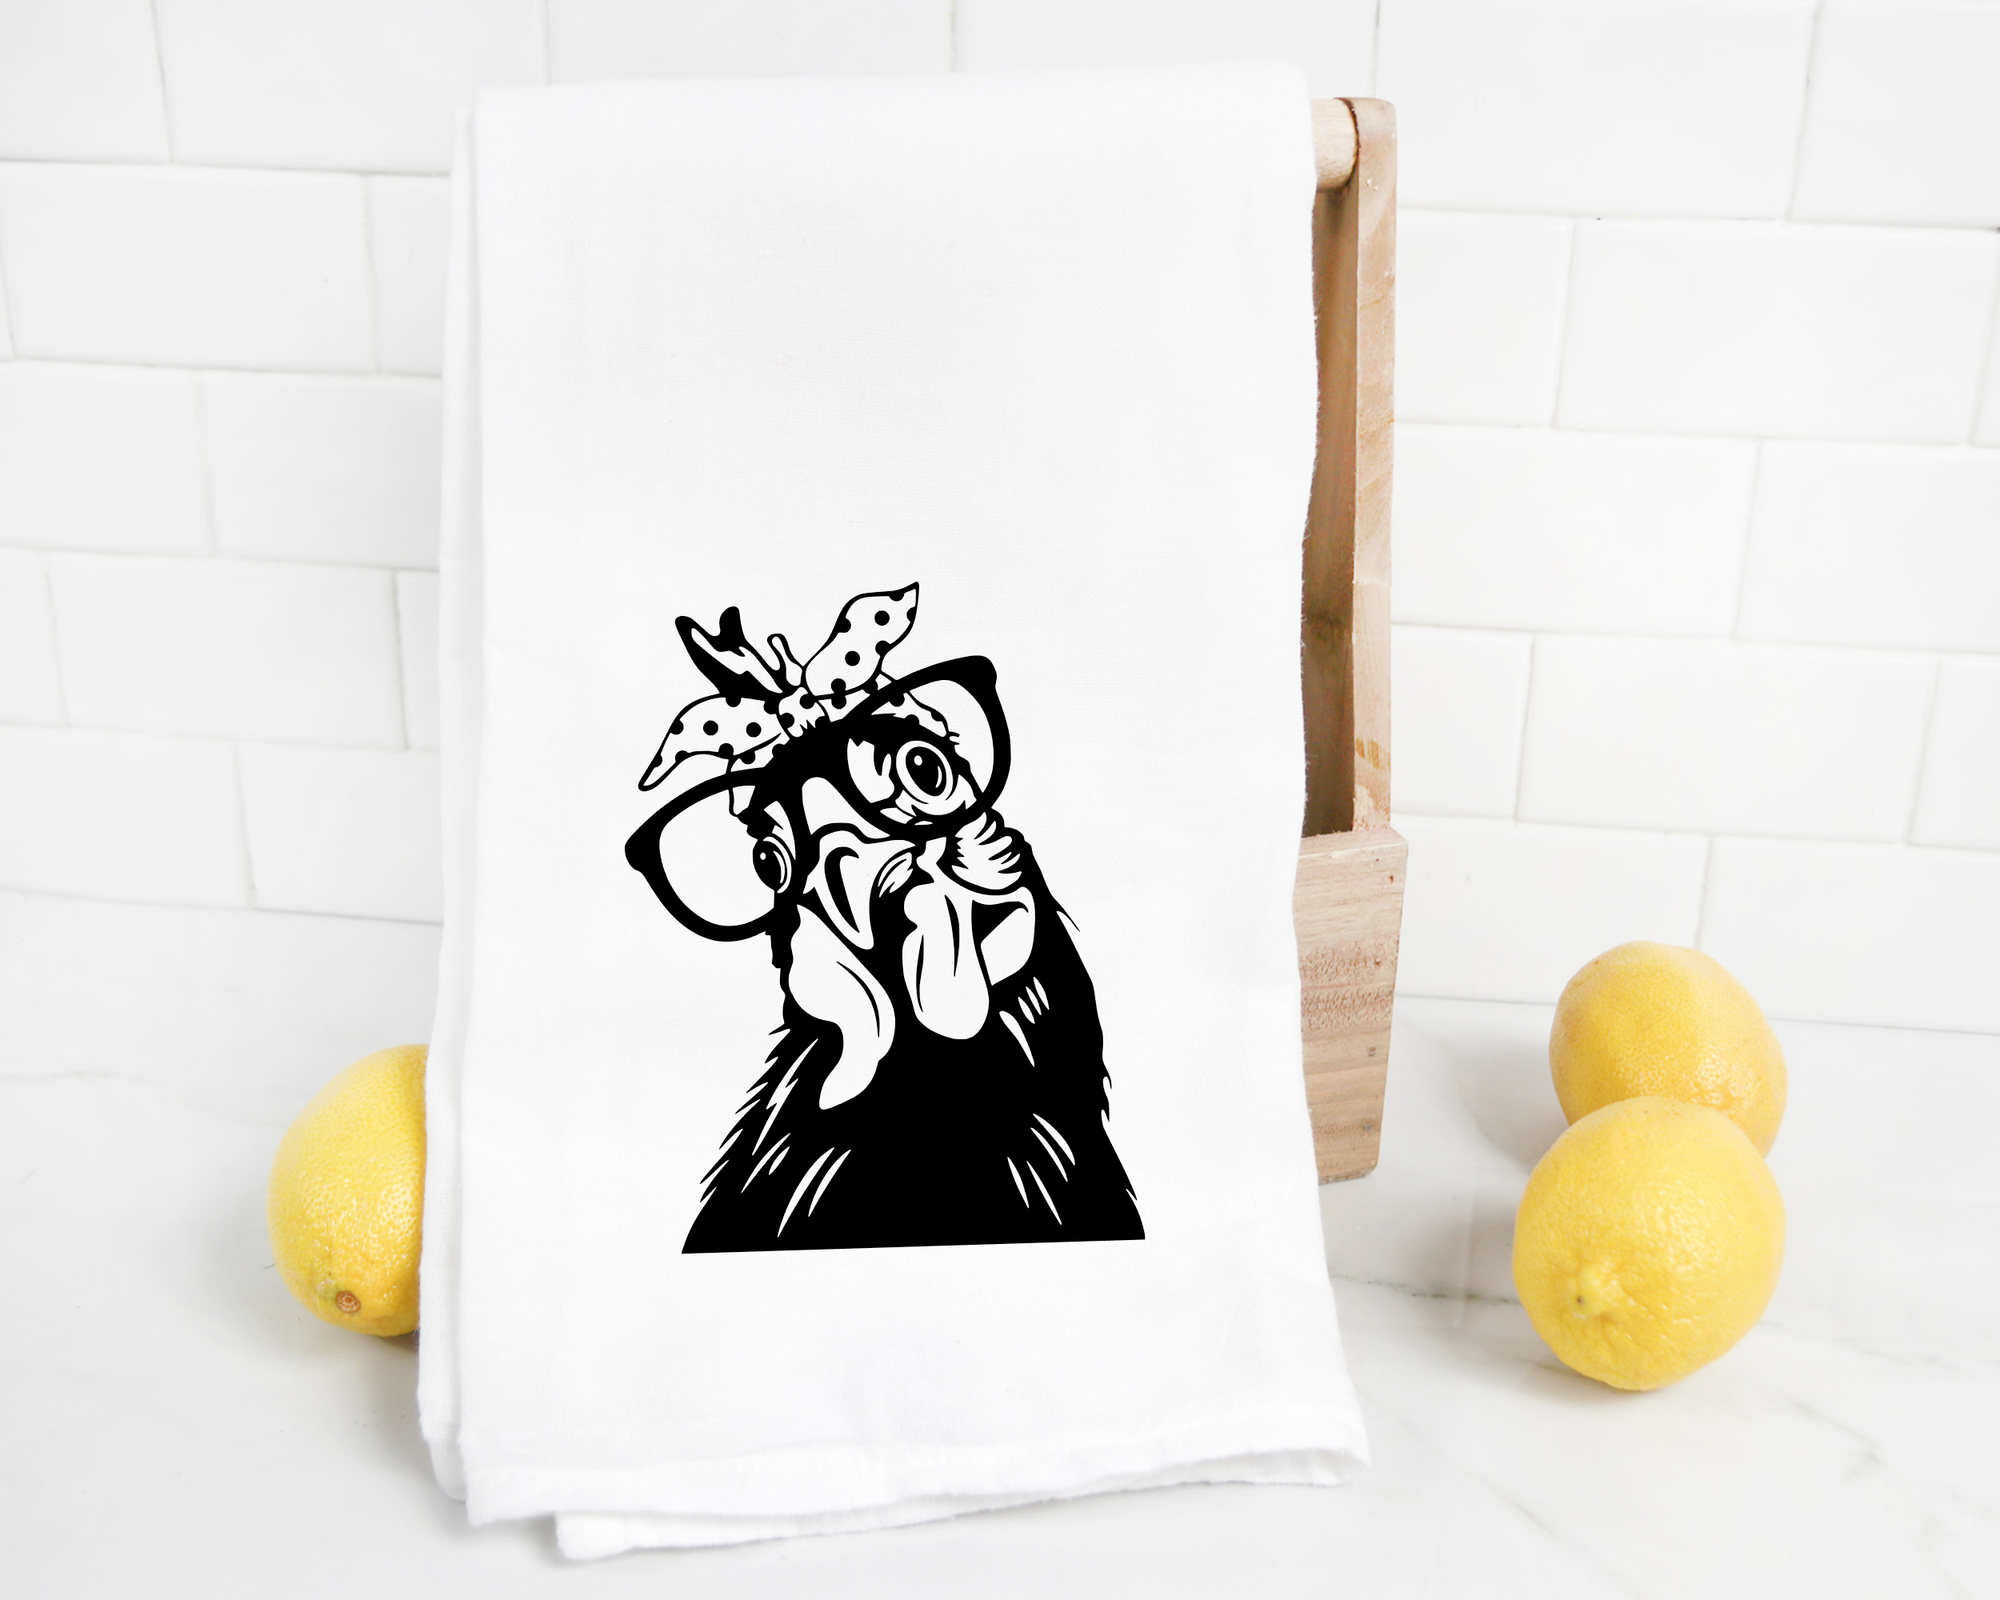 A white Funny Chicken Tea Towel with a black heat transfer vinyl illustration of a funny chicken wearing glasses, displayed on a countertop with lemons nearby.